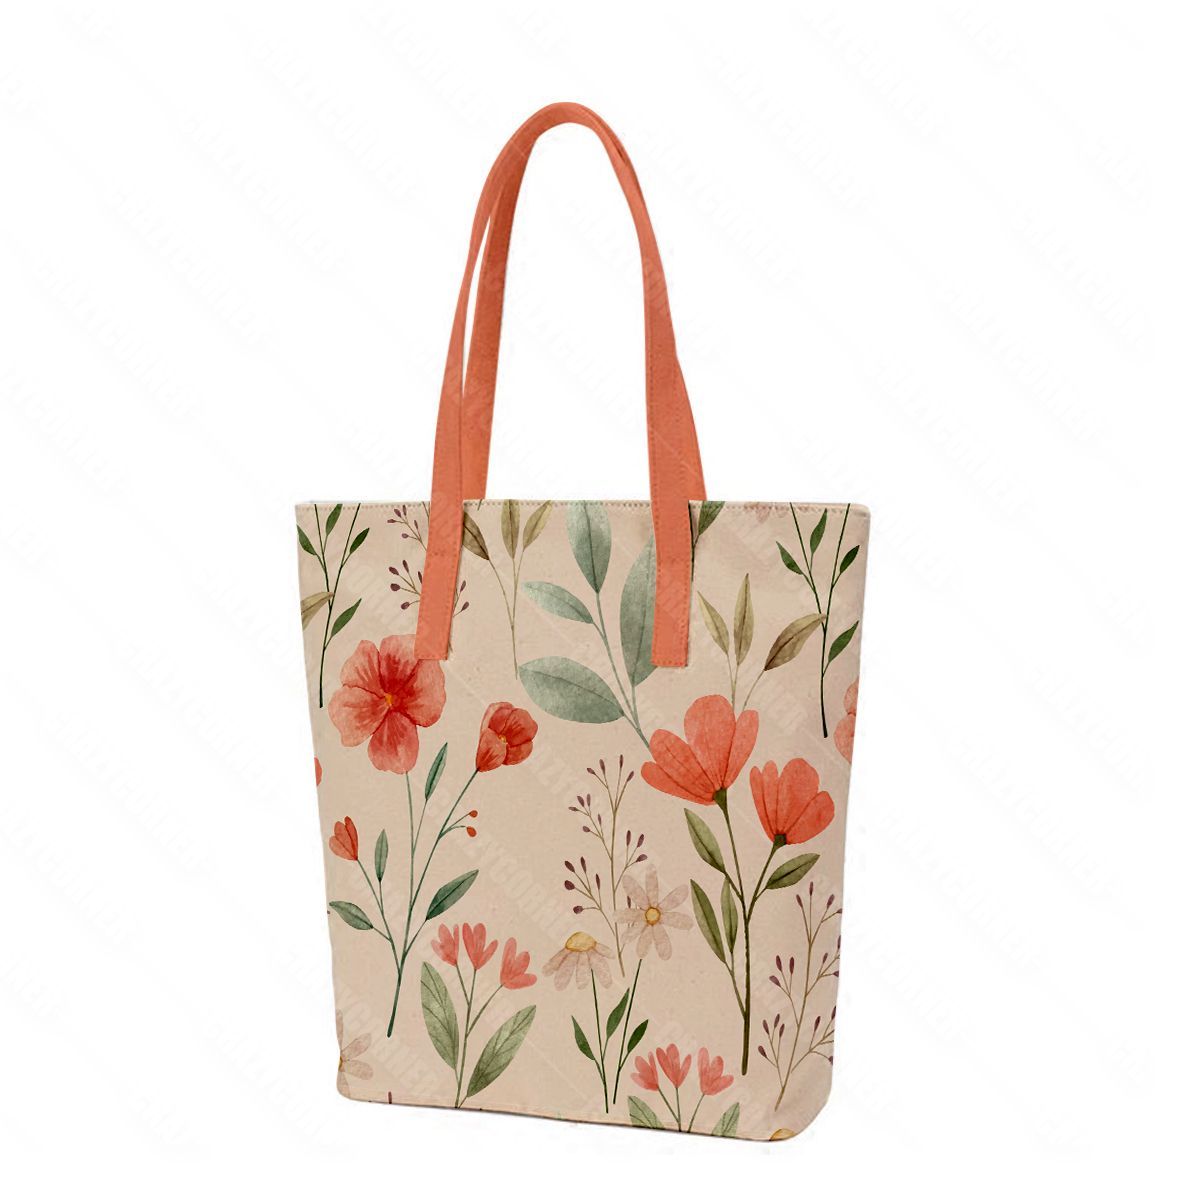 Discover 74+ high quality canvas tote bags best - esthdonghoadian